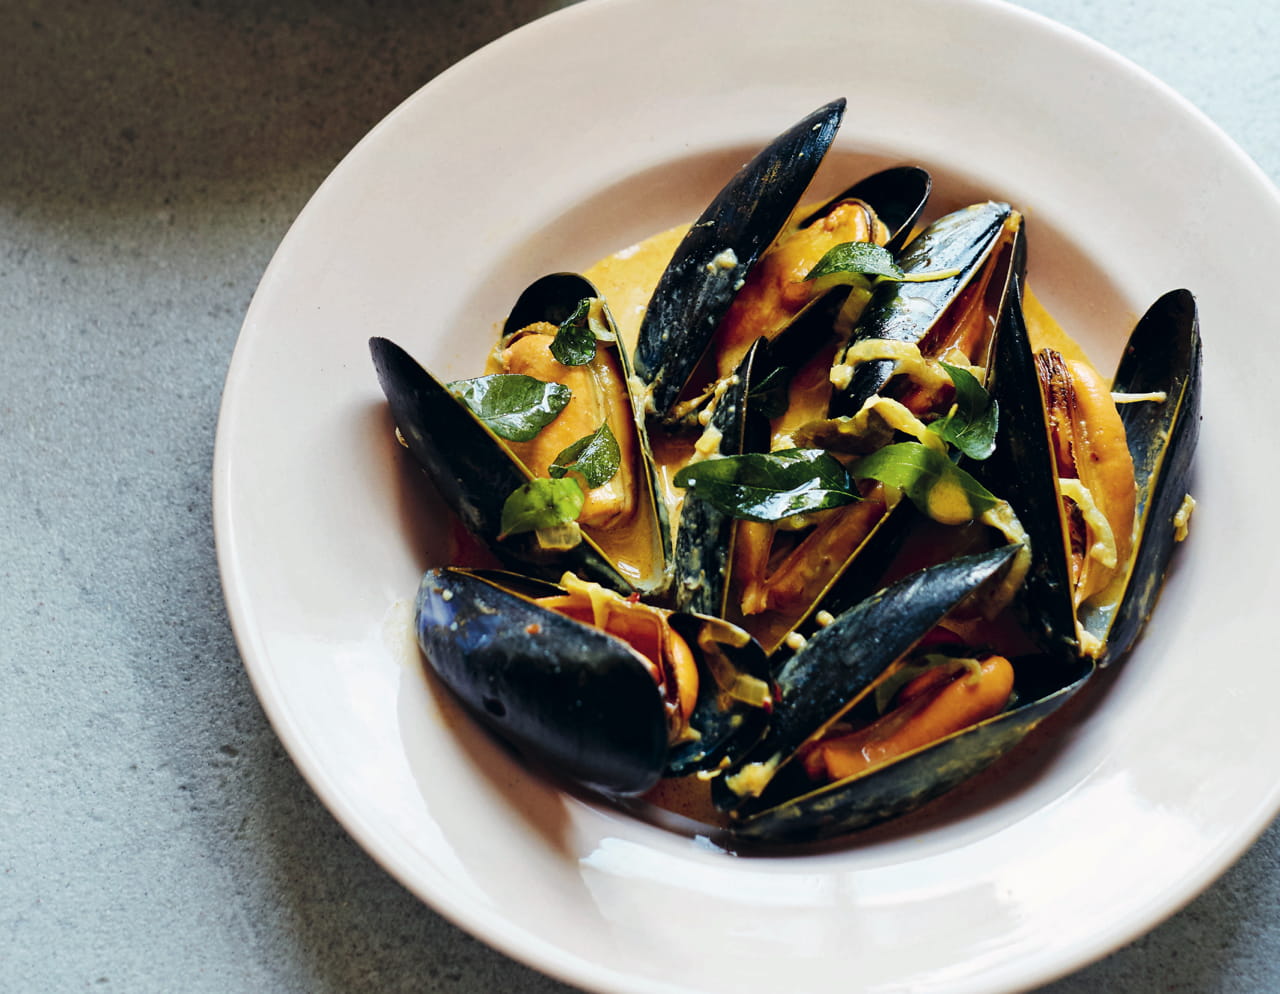  Curry leaf mussels and fries